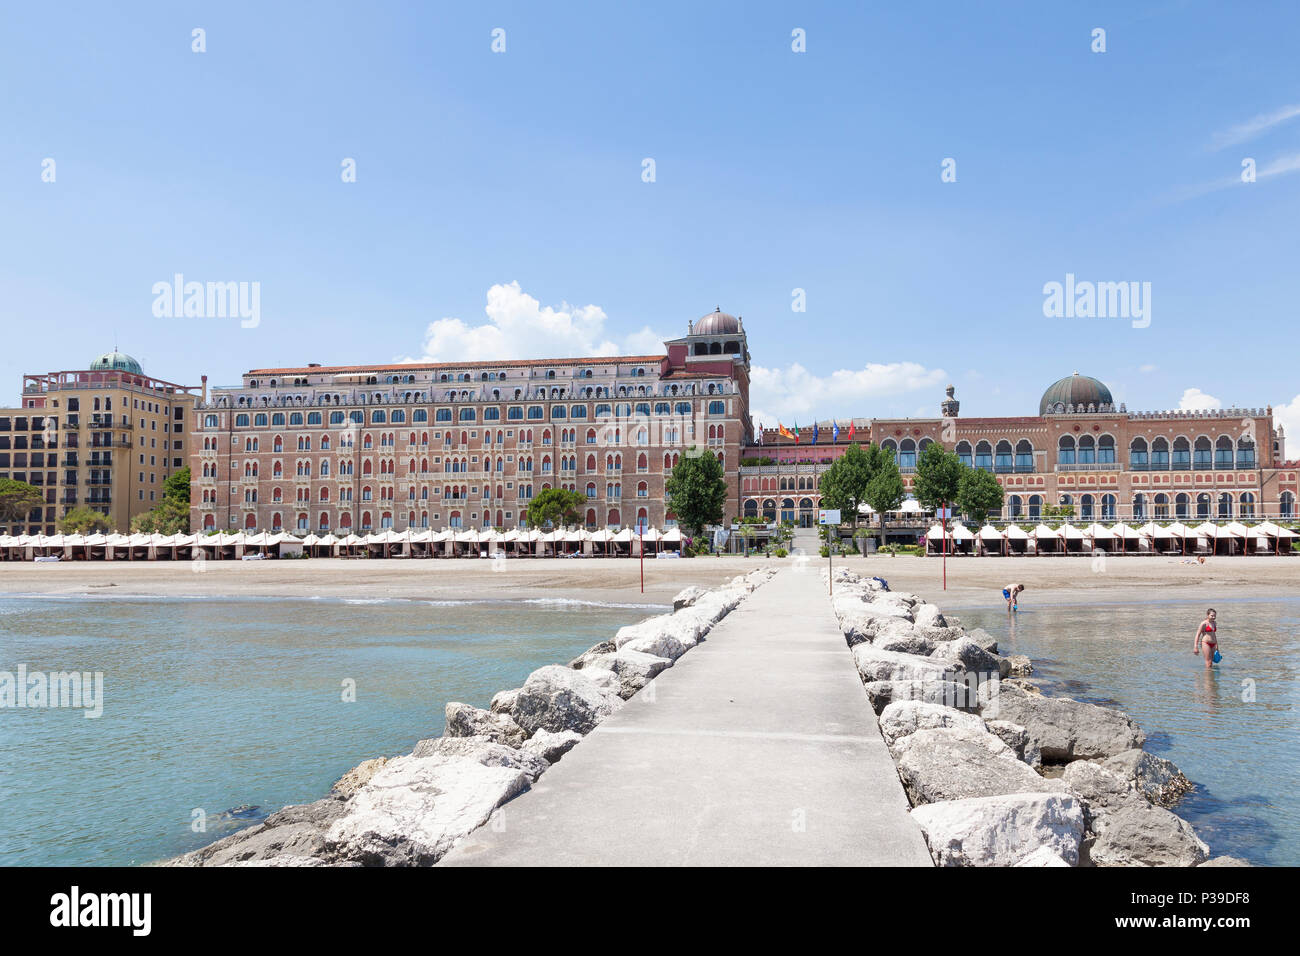 Front facade of Hotel Excelsior with beach and cabanas, Lido di Venezia,  Lido, Venice, Veneto, Italy from a breakwater, Morrish architecture. Stock Photo